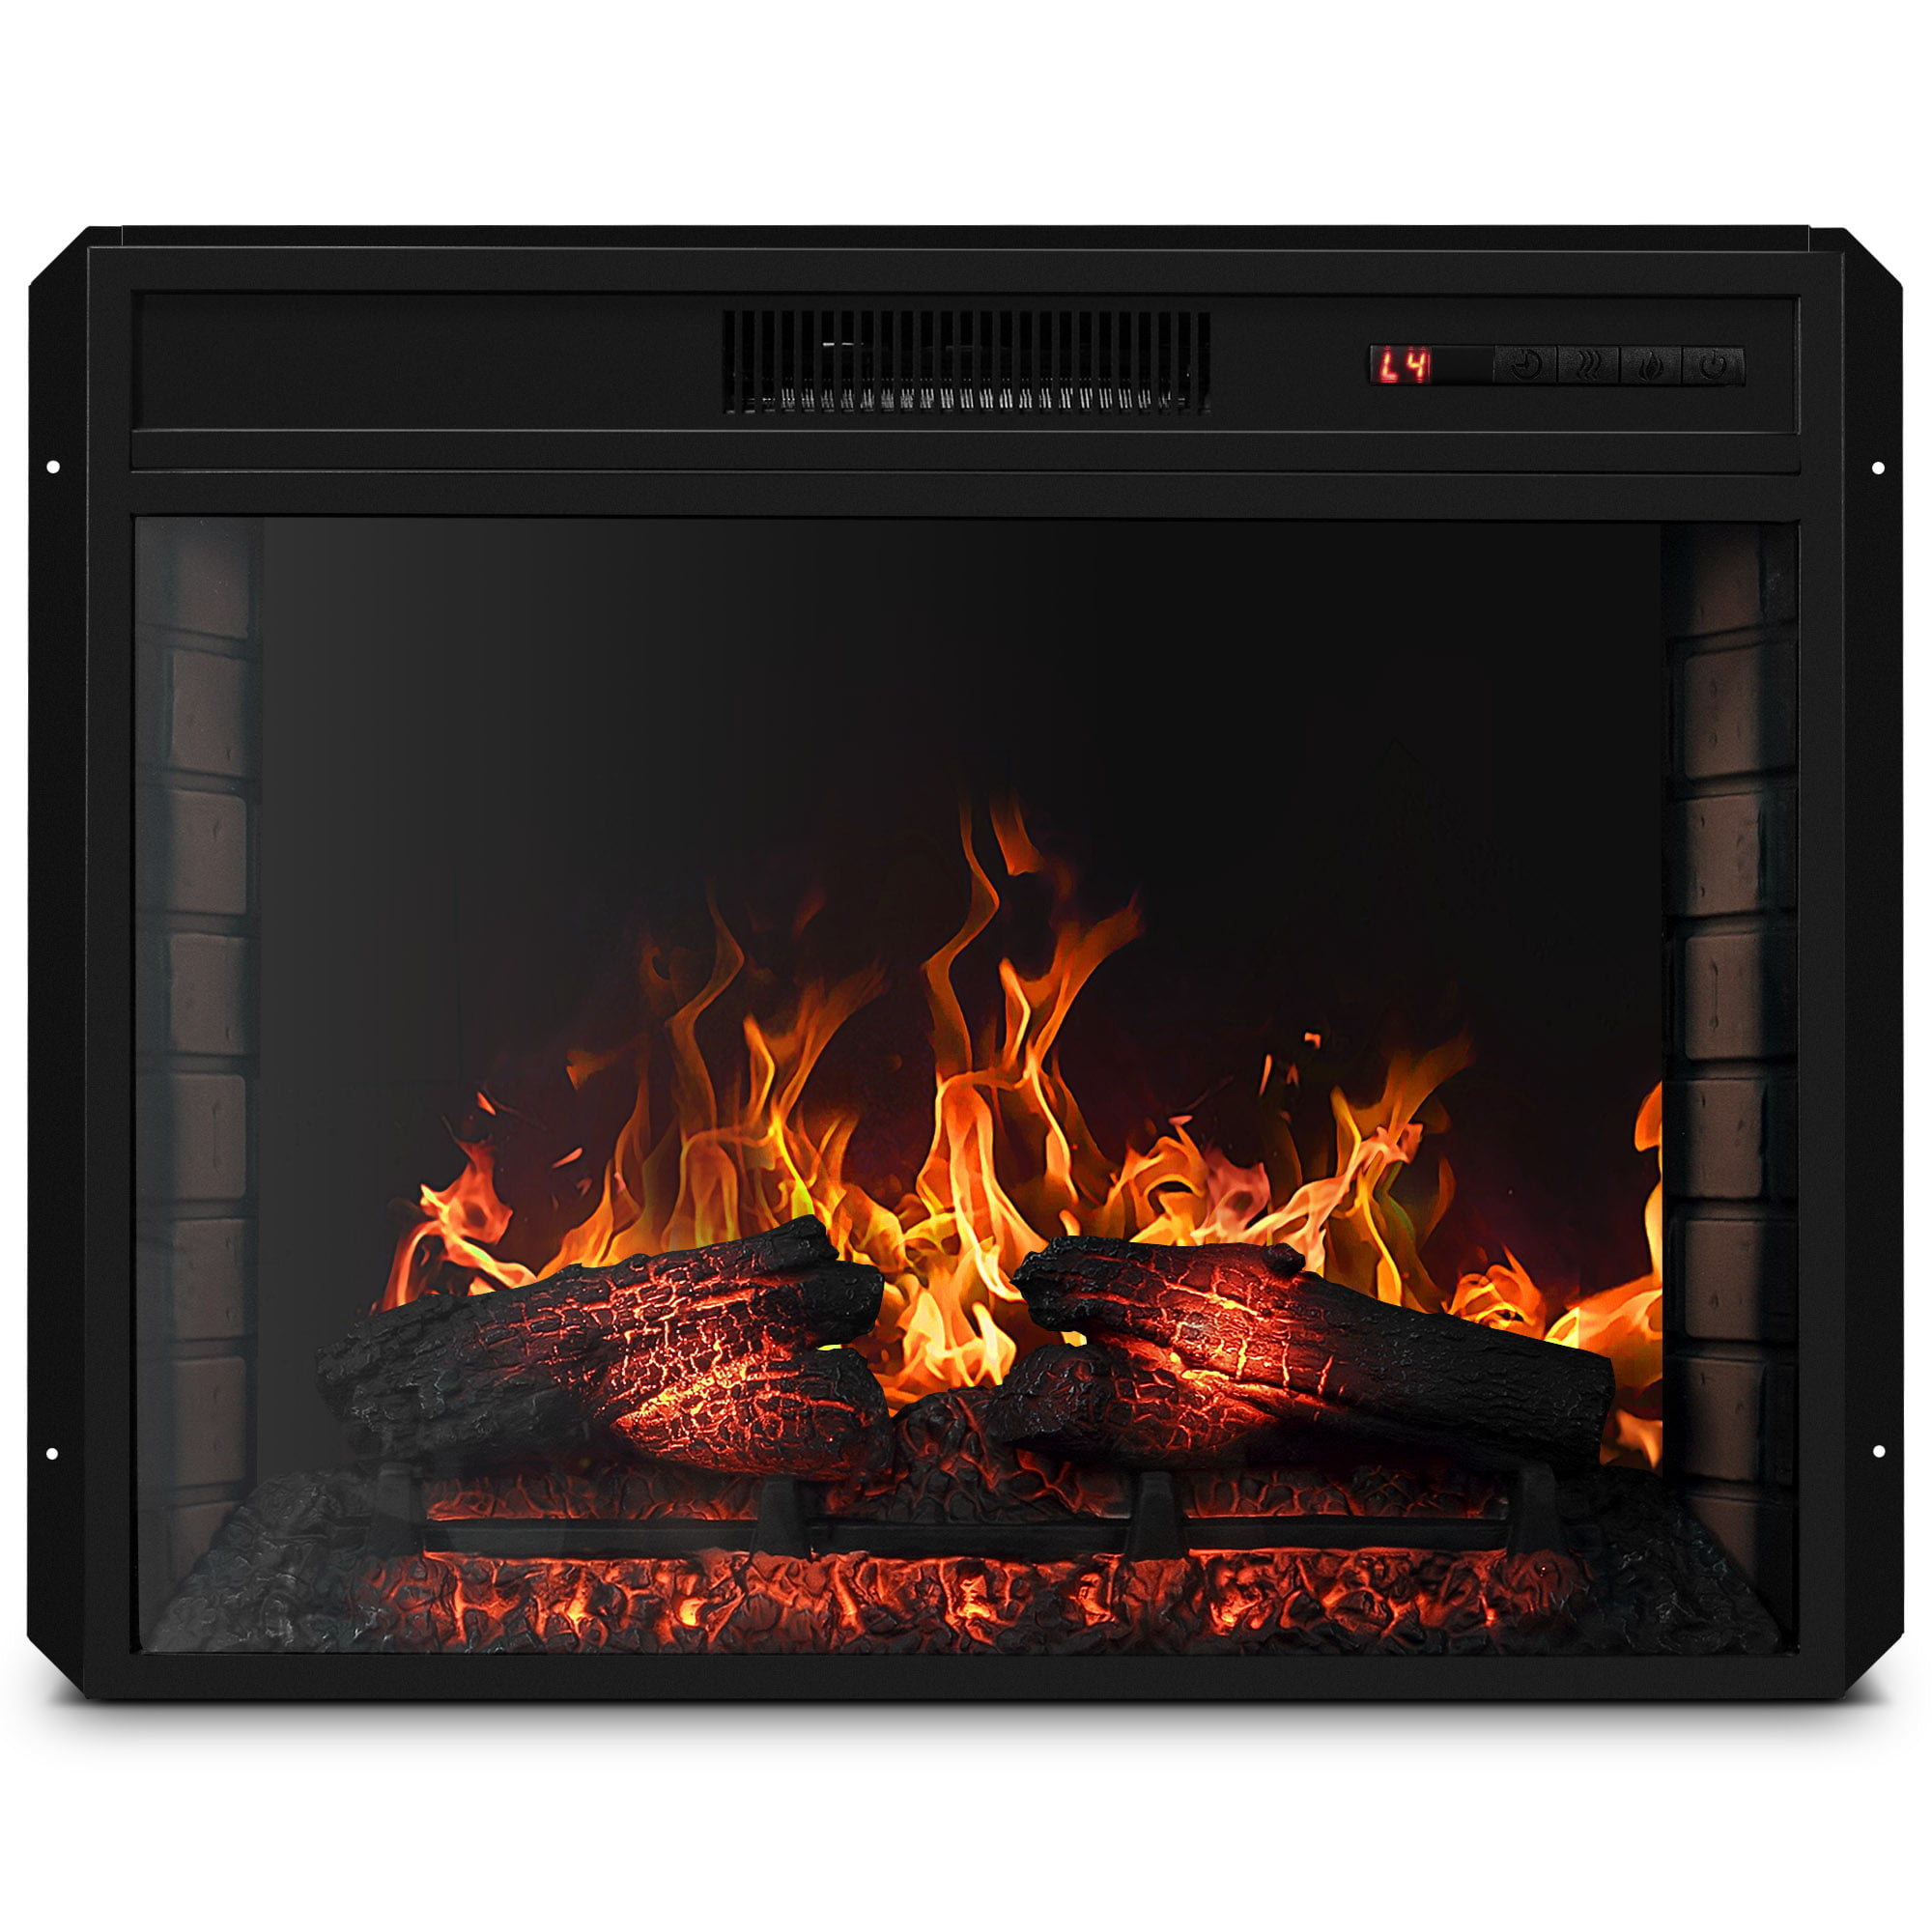 Black Overheating Safety Protection BELLEZE 26 Inch 3DInfrared Mounted Electric Fireplace Insert with Remote Control Portable Indoor Space Heater 1400W Heater w//Long Glass View